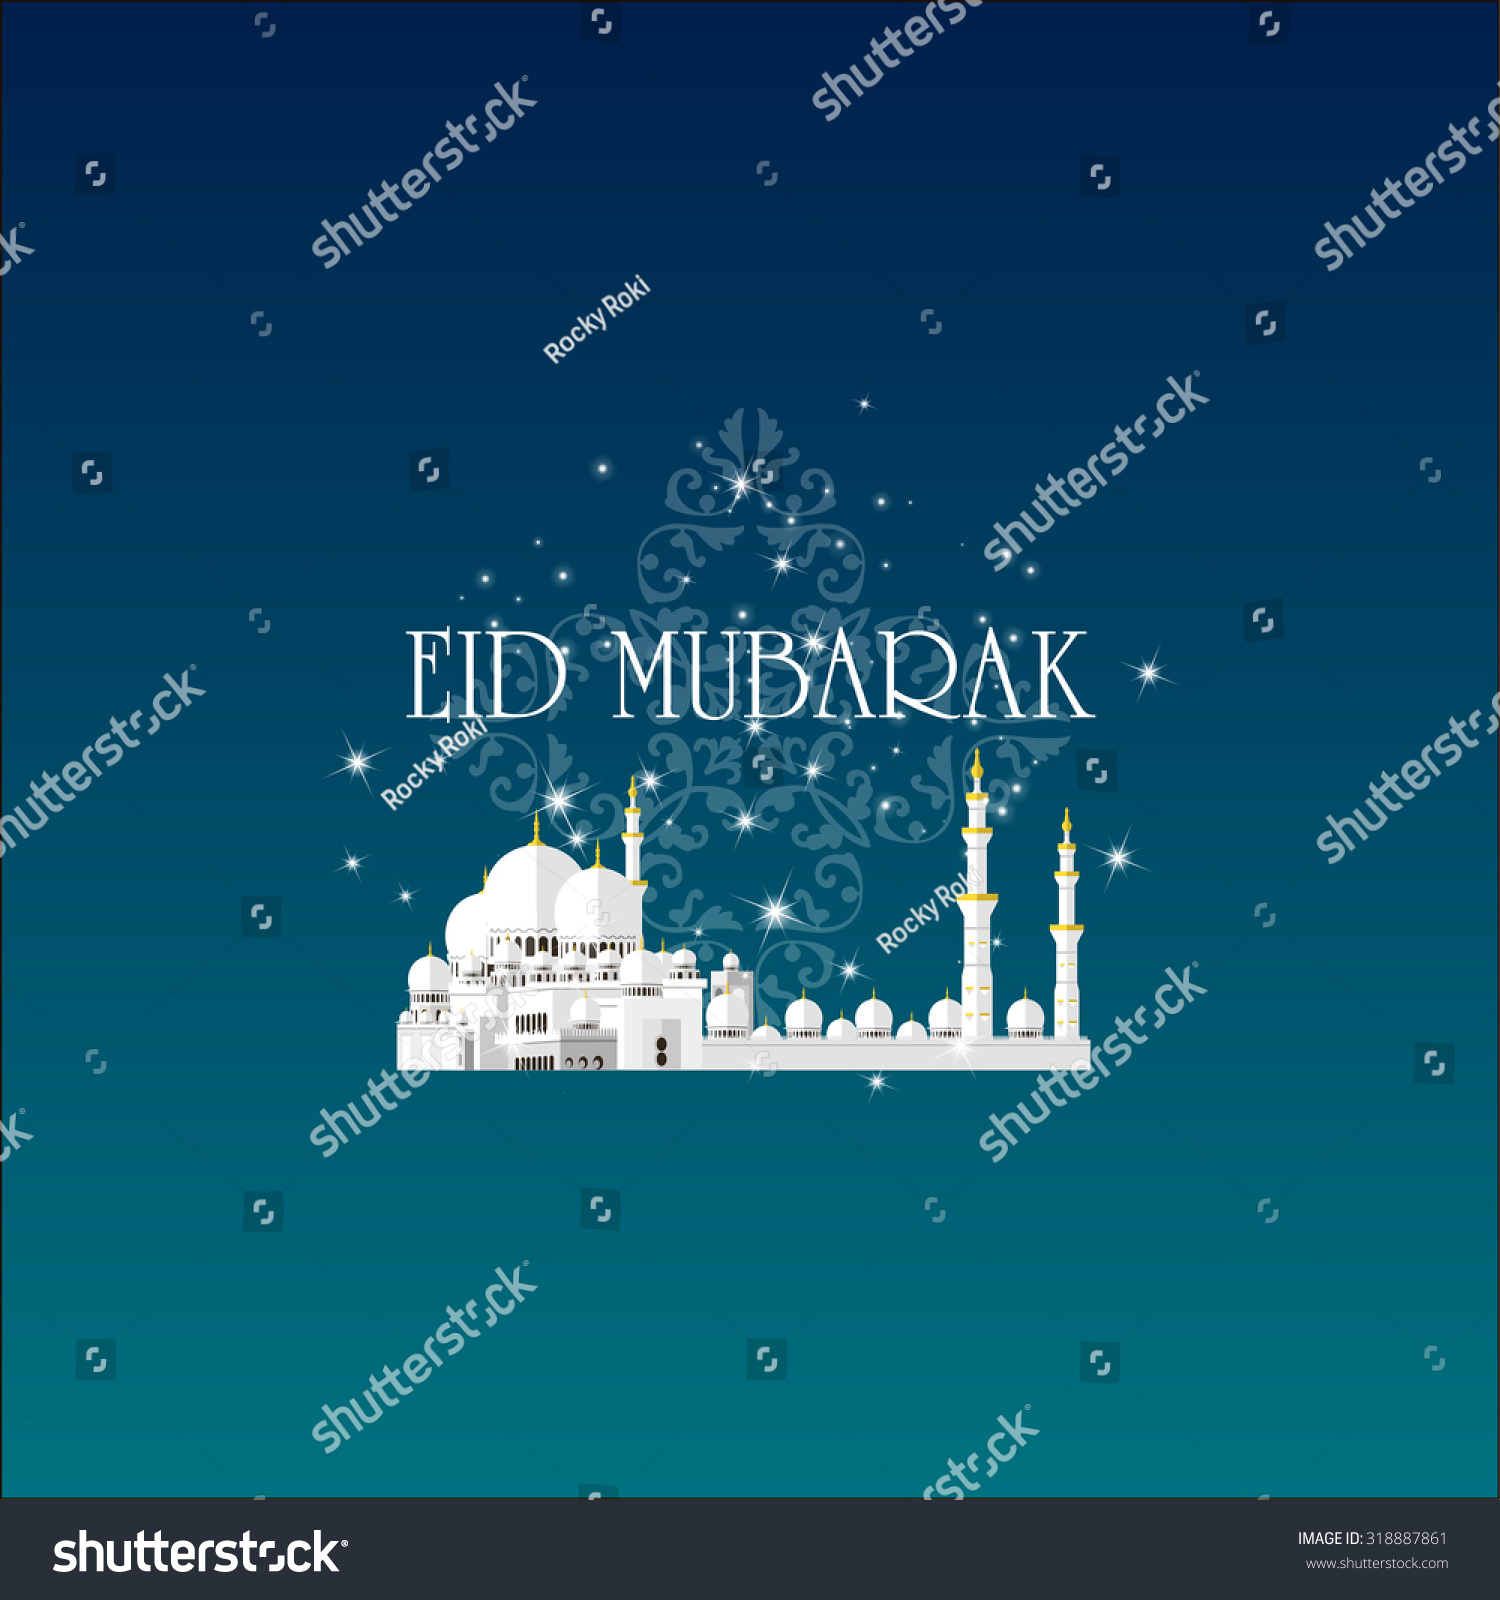 eid mubarak greeting cards. muslim background. mosque and moon with stars. vector illustration #318887861